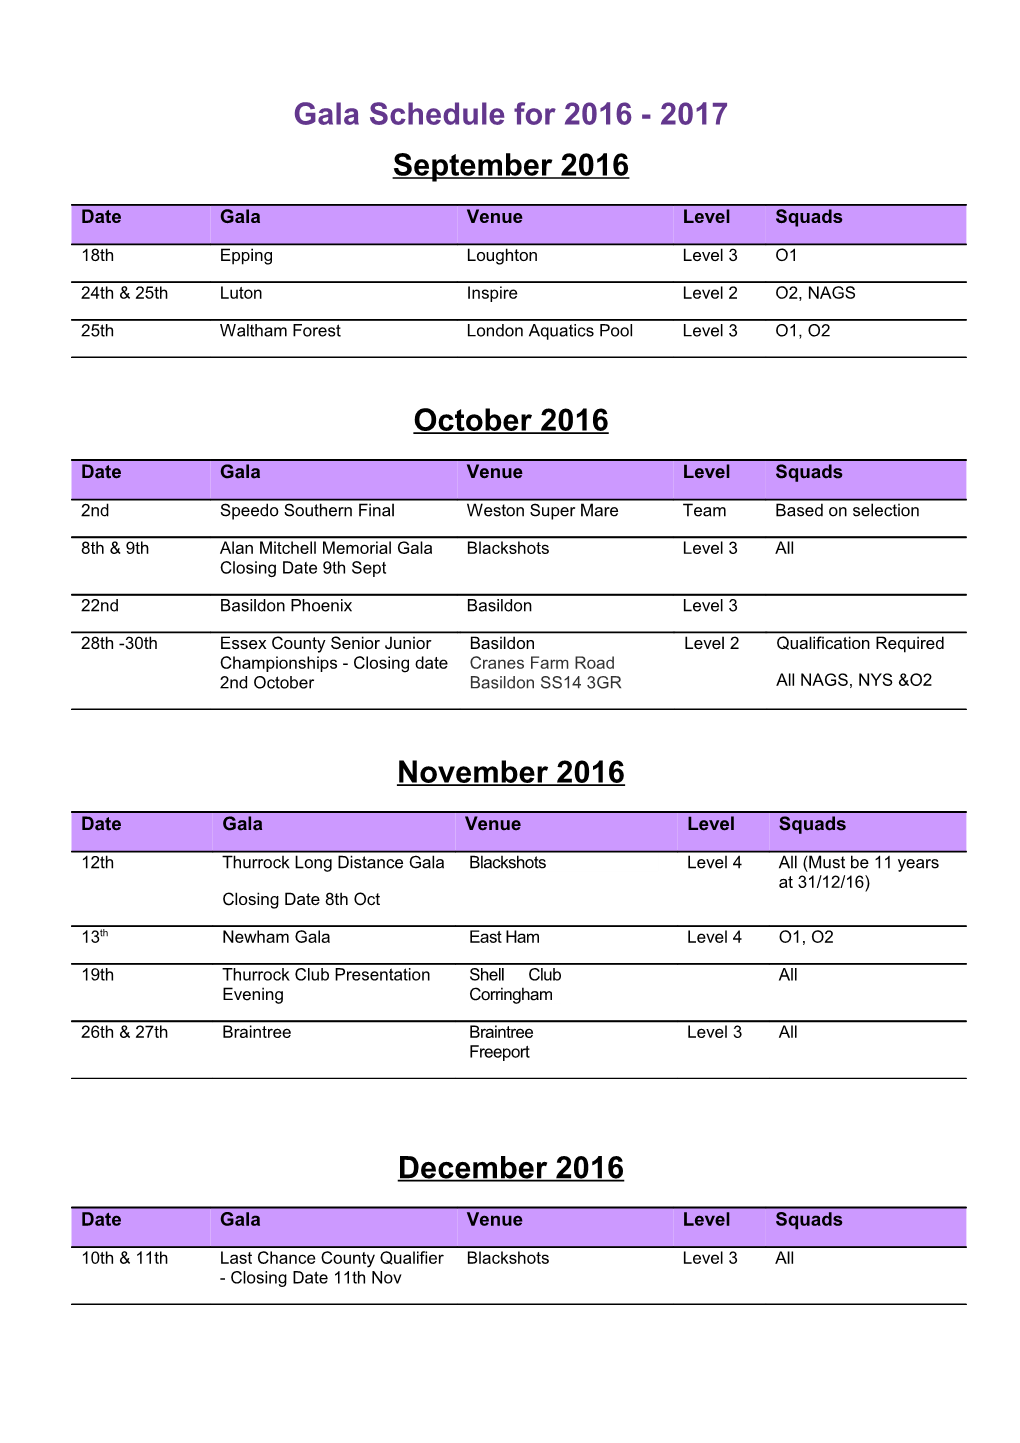 Gala Schedule for 2016 - 2017